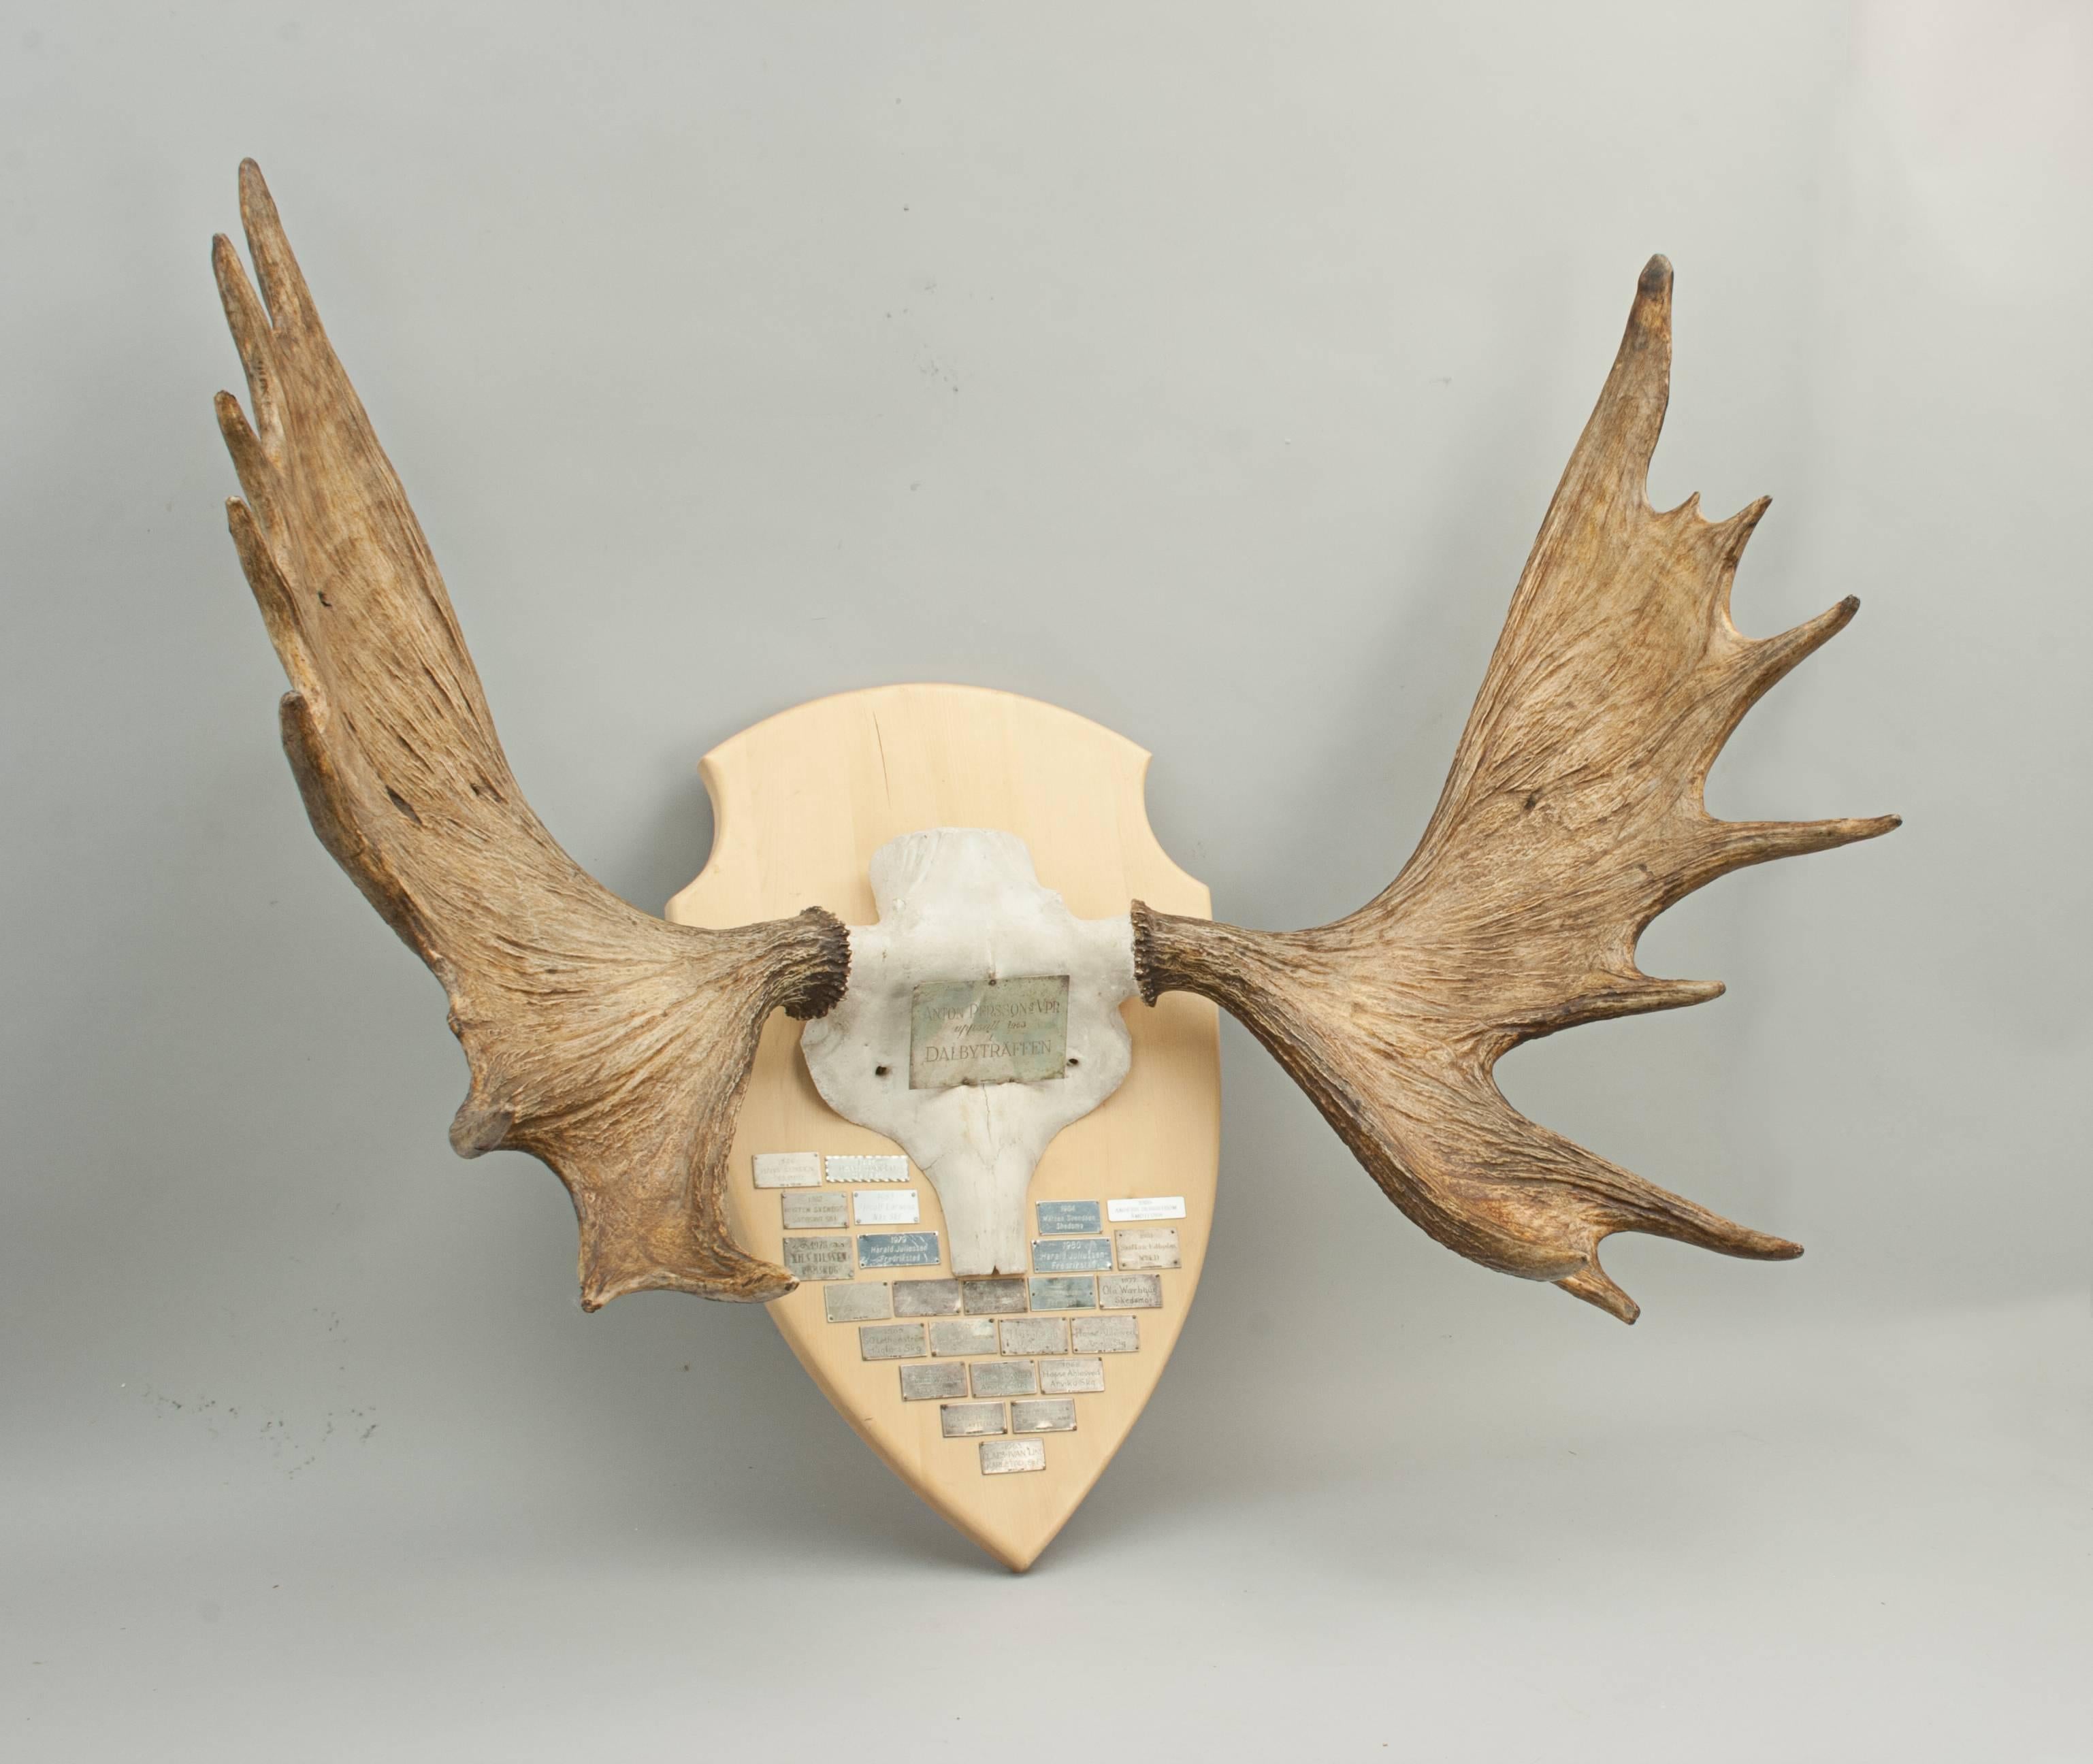 Vintage taxidermy, moose antlers, palmate antlers.
Pair of 18 point moose antlers, Elk antlers, with skull cap, mounted onto a wooden shield with 26 silver plaques. The main plaque reads 'ANTON PERSSONs VPR, uppsatt 1963, DALBYTRAFFEN' with a